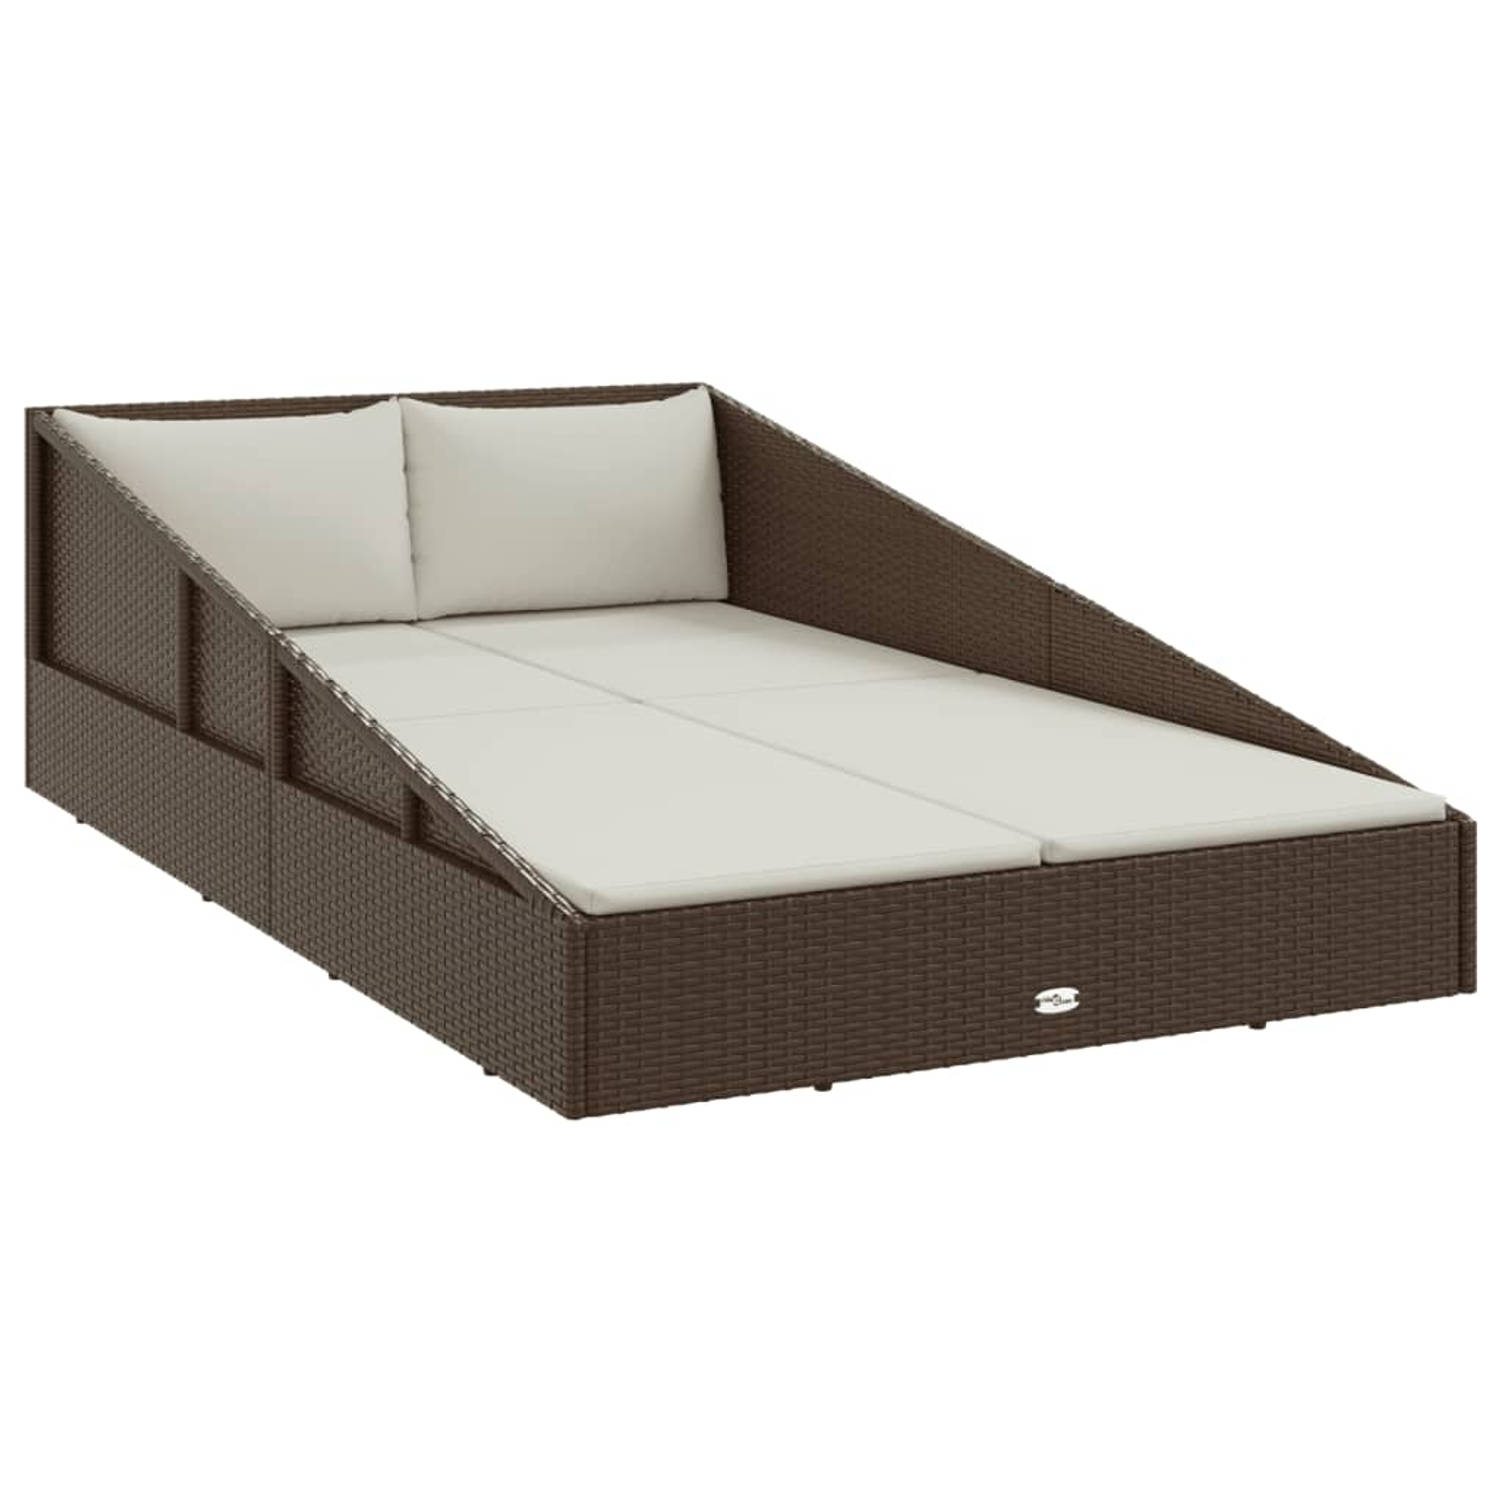 The Living Store Tuinbed 110x200 cm poly rattan bruin - Ligbed